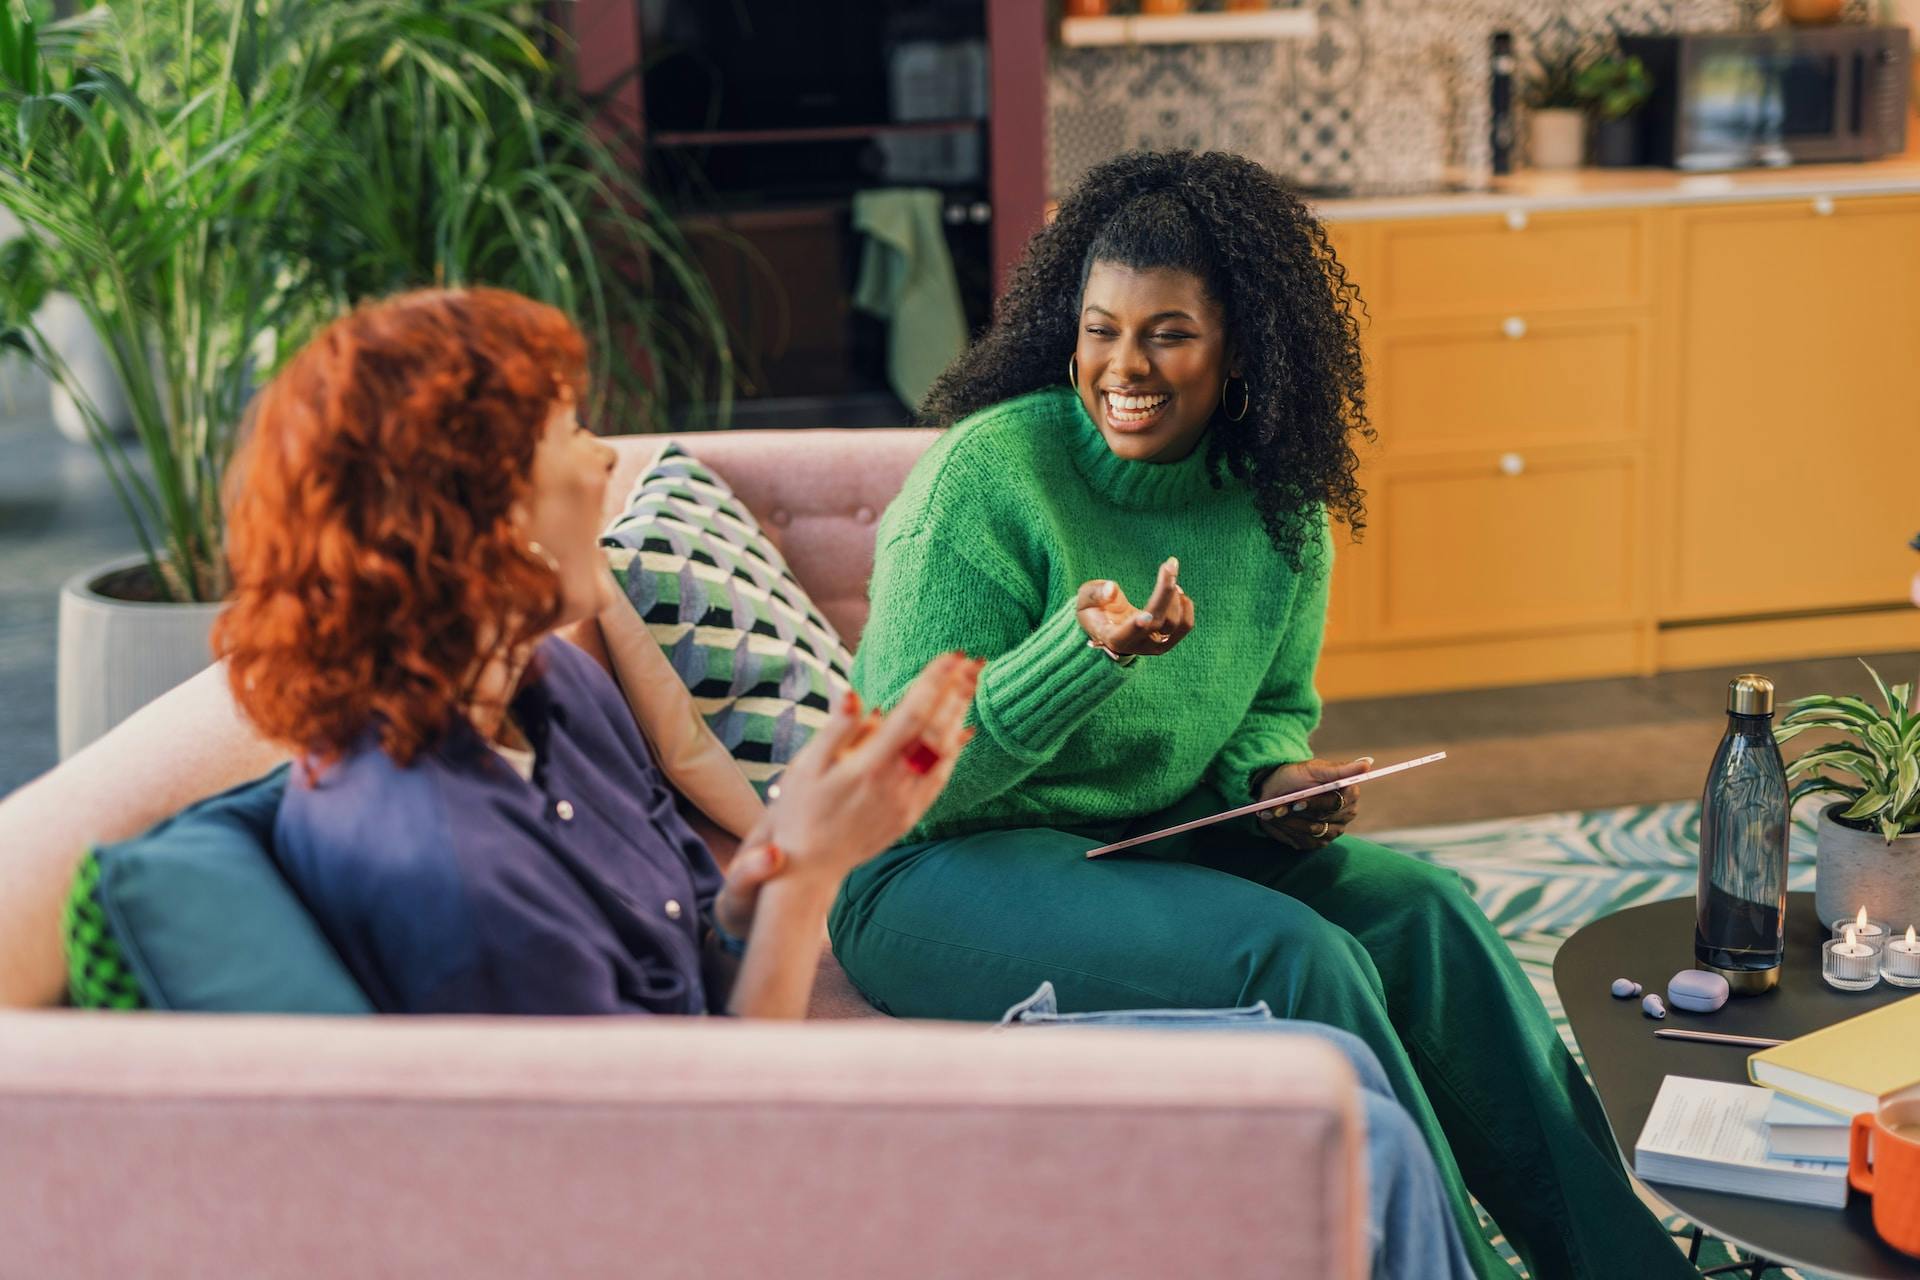 Two women sitting on a couch, talking and laughing